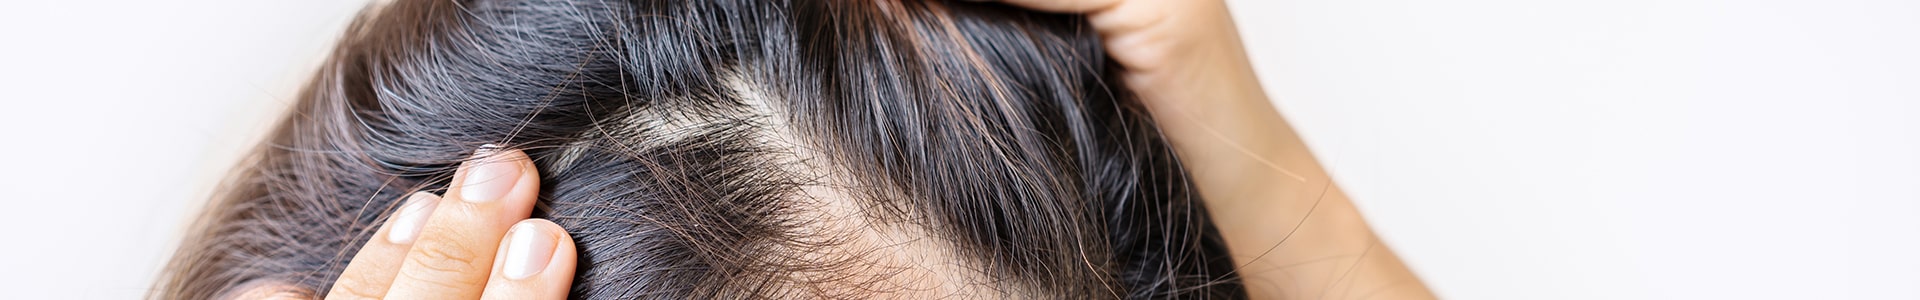 Platelet-rich plasma injections for hair loss